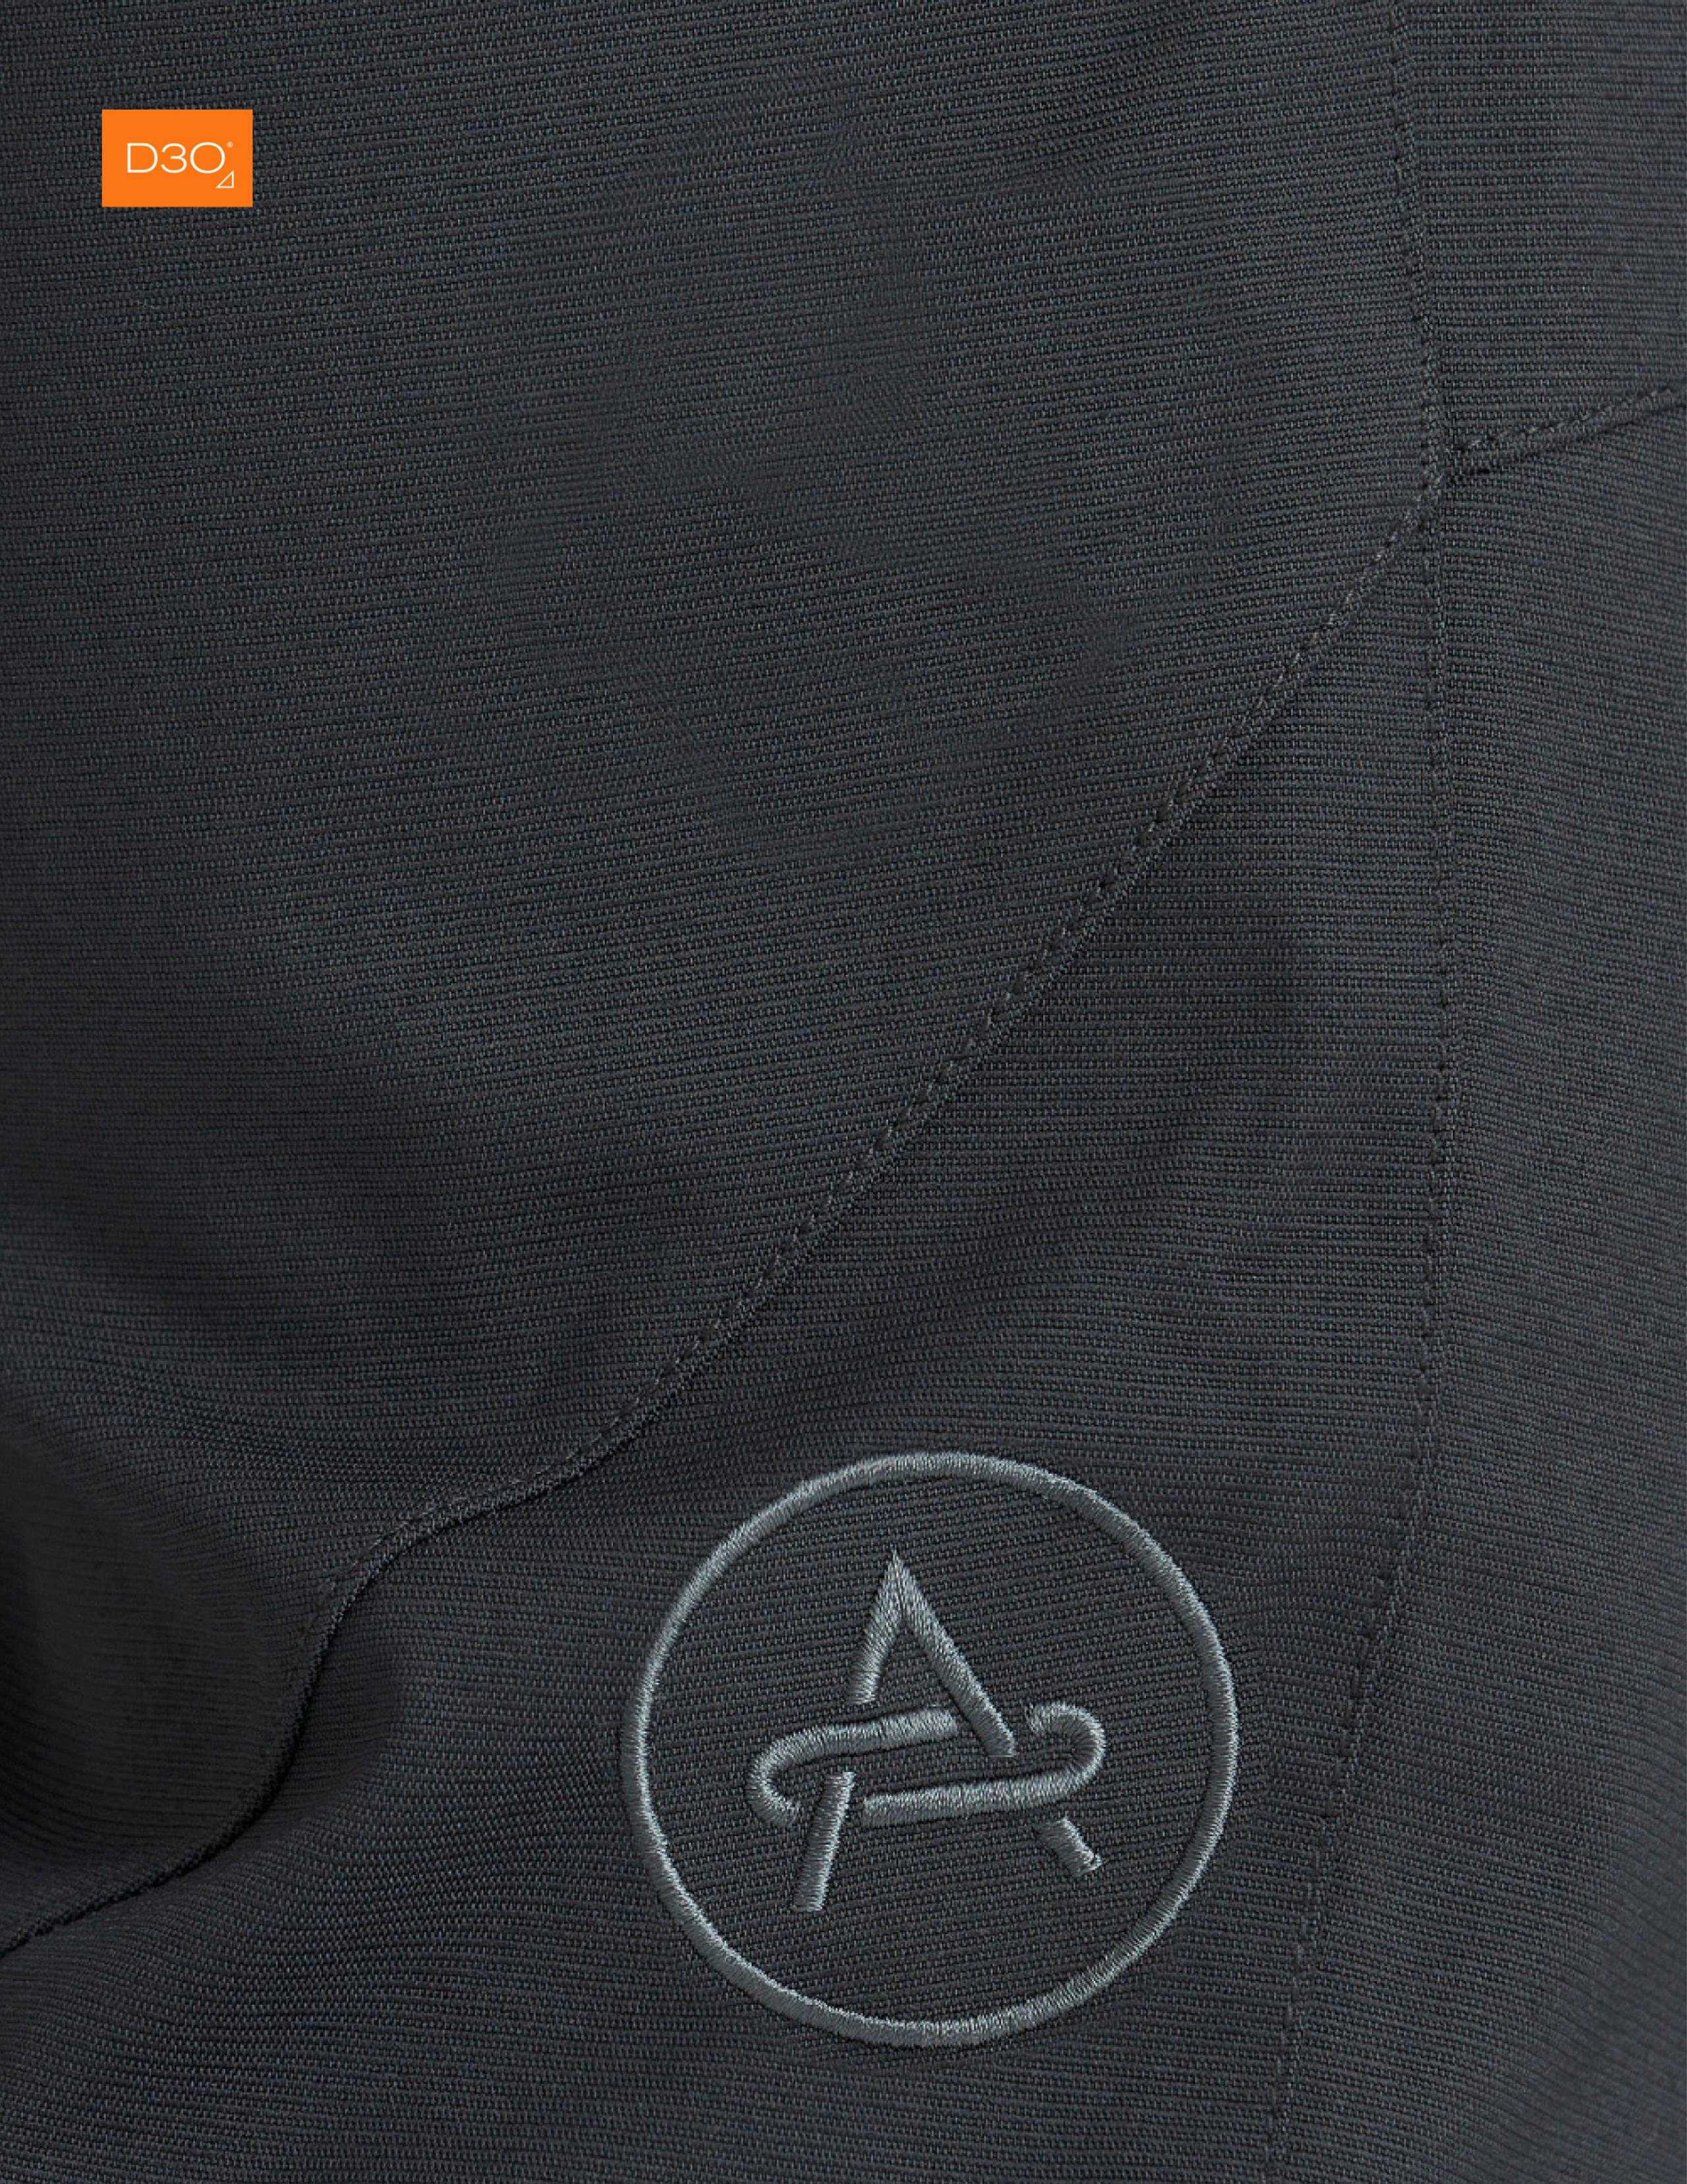 Closeup view of pant fabric with embroidered AETHER logo